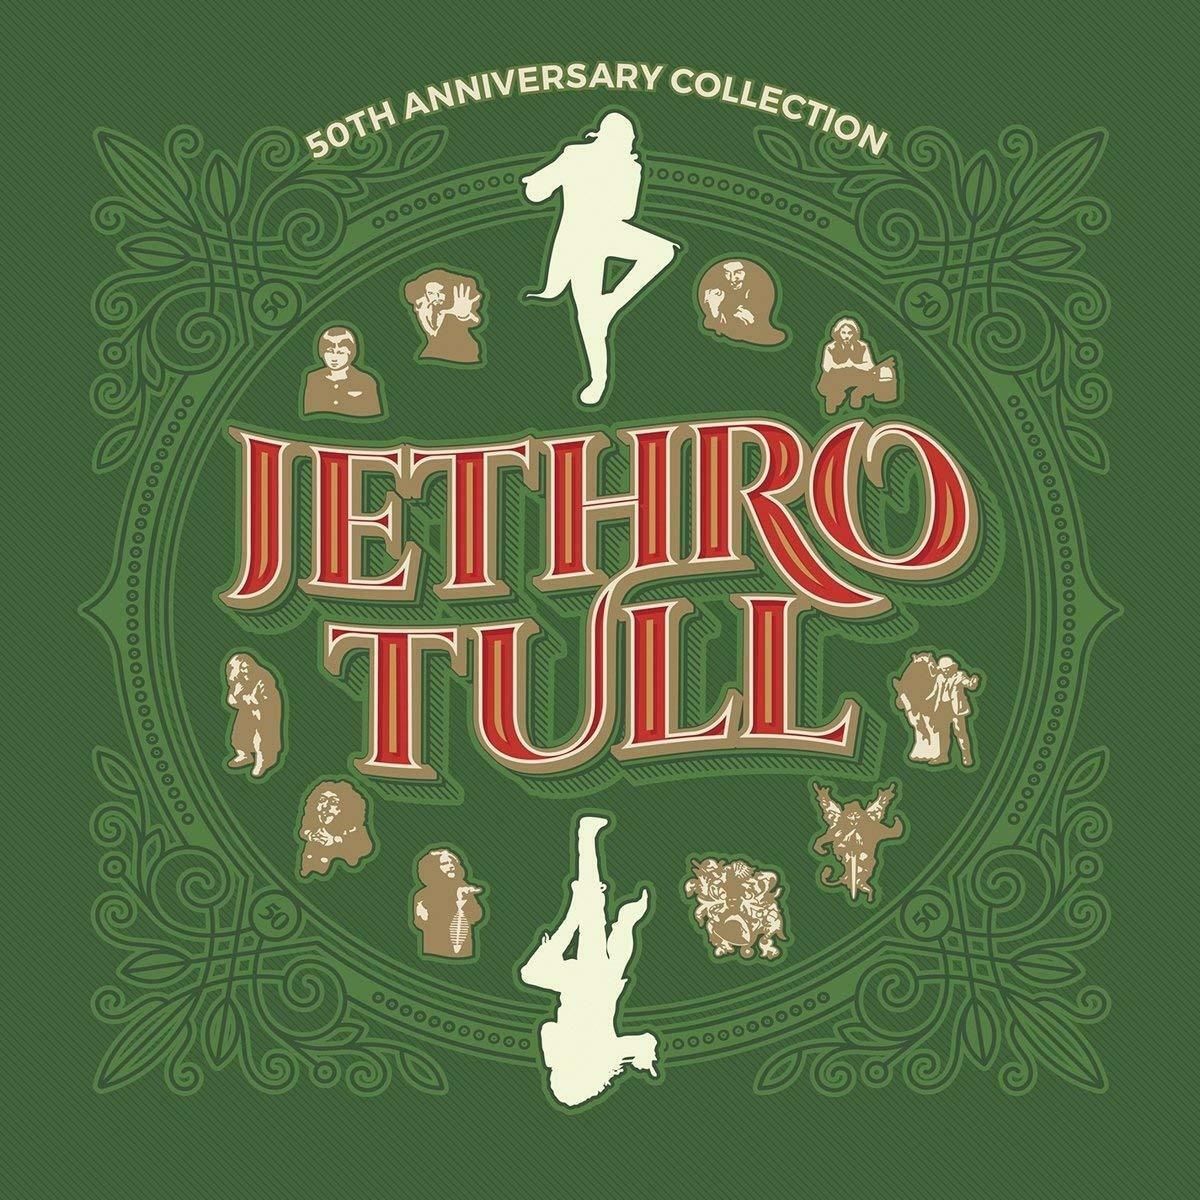 Jethro Tull - 50th Anniversary Collection